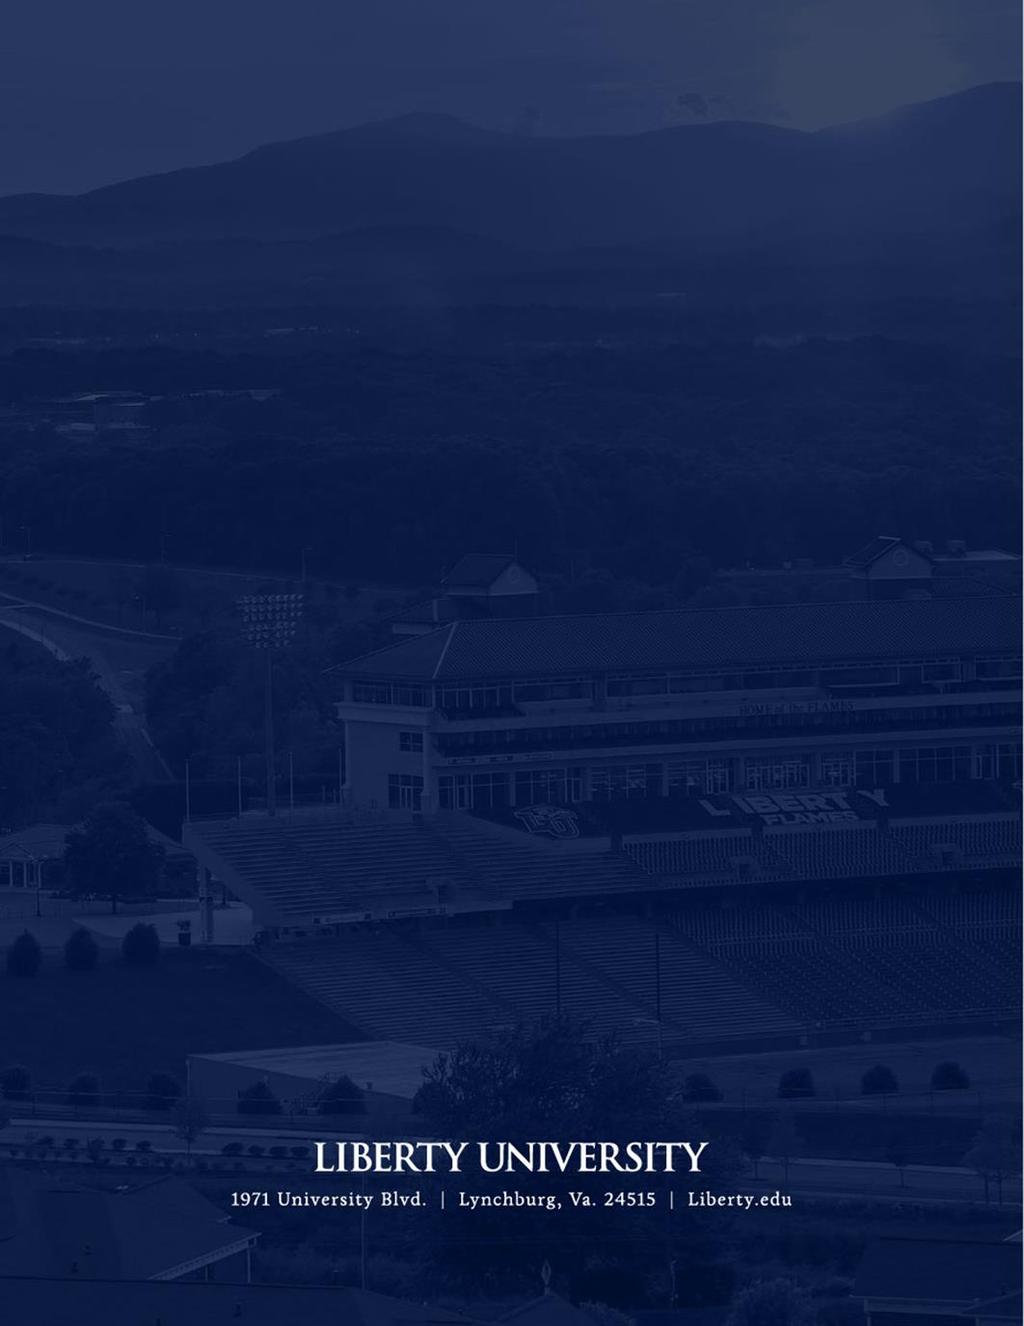 NOMINATION & APPLICATION PROCEDURE AN EXCEPTIONAL OPPORTUNITY COME GROW WITH US! Liberty University, the largest Christian university in the world, is seeking a Dean for the School of Engineering.